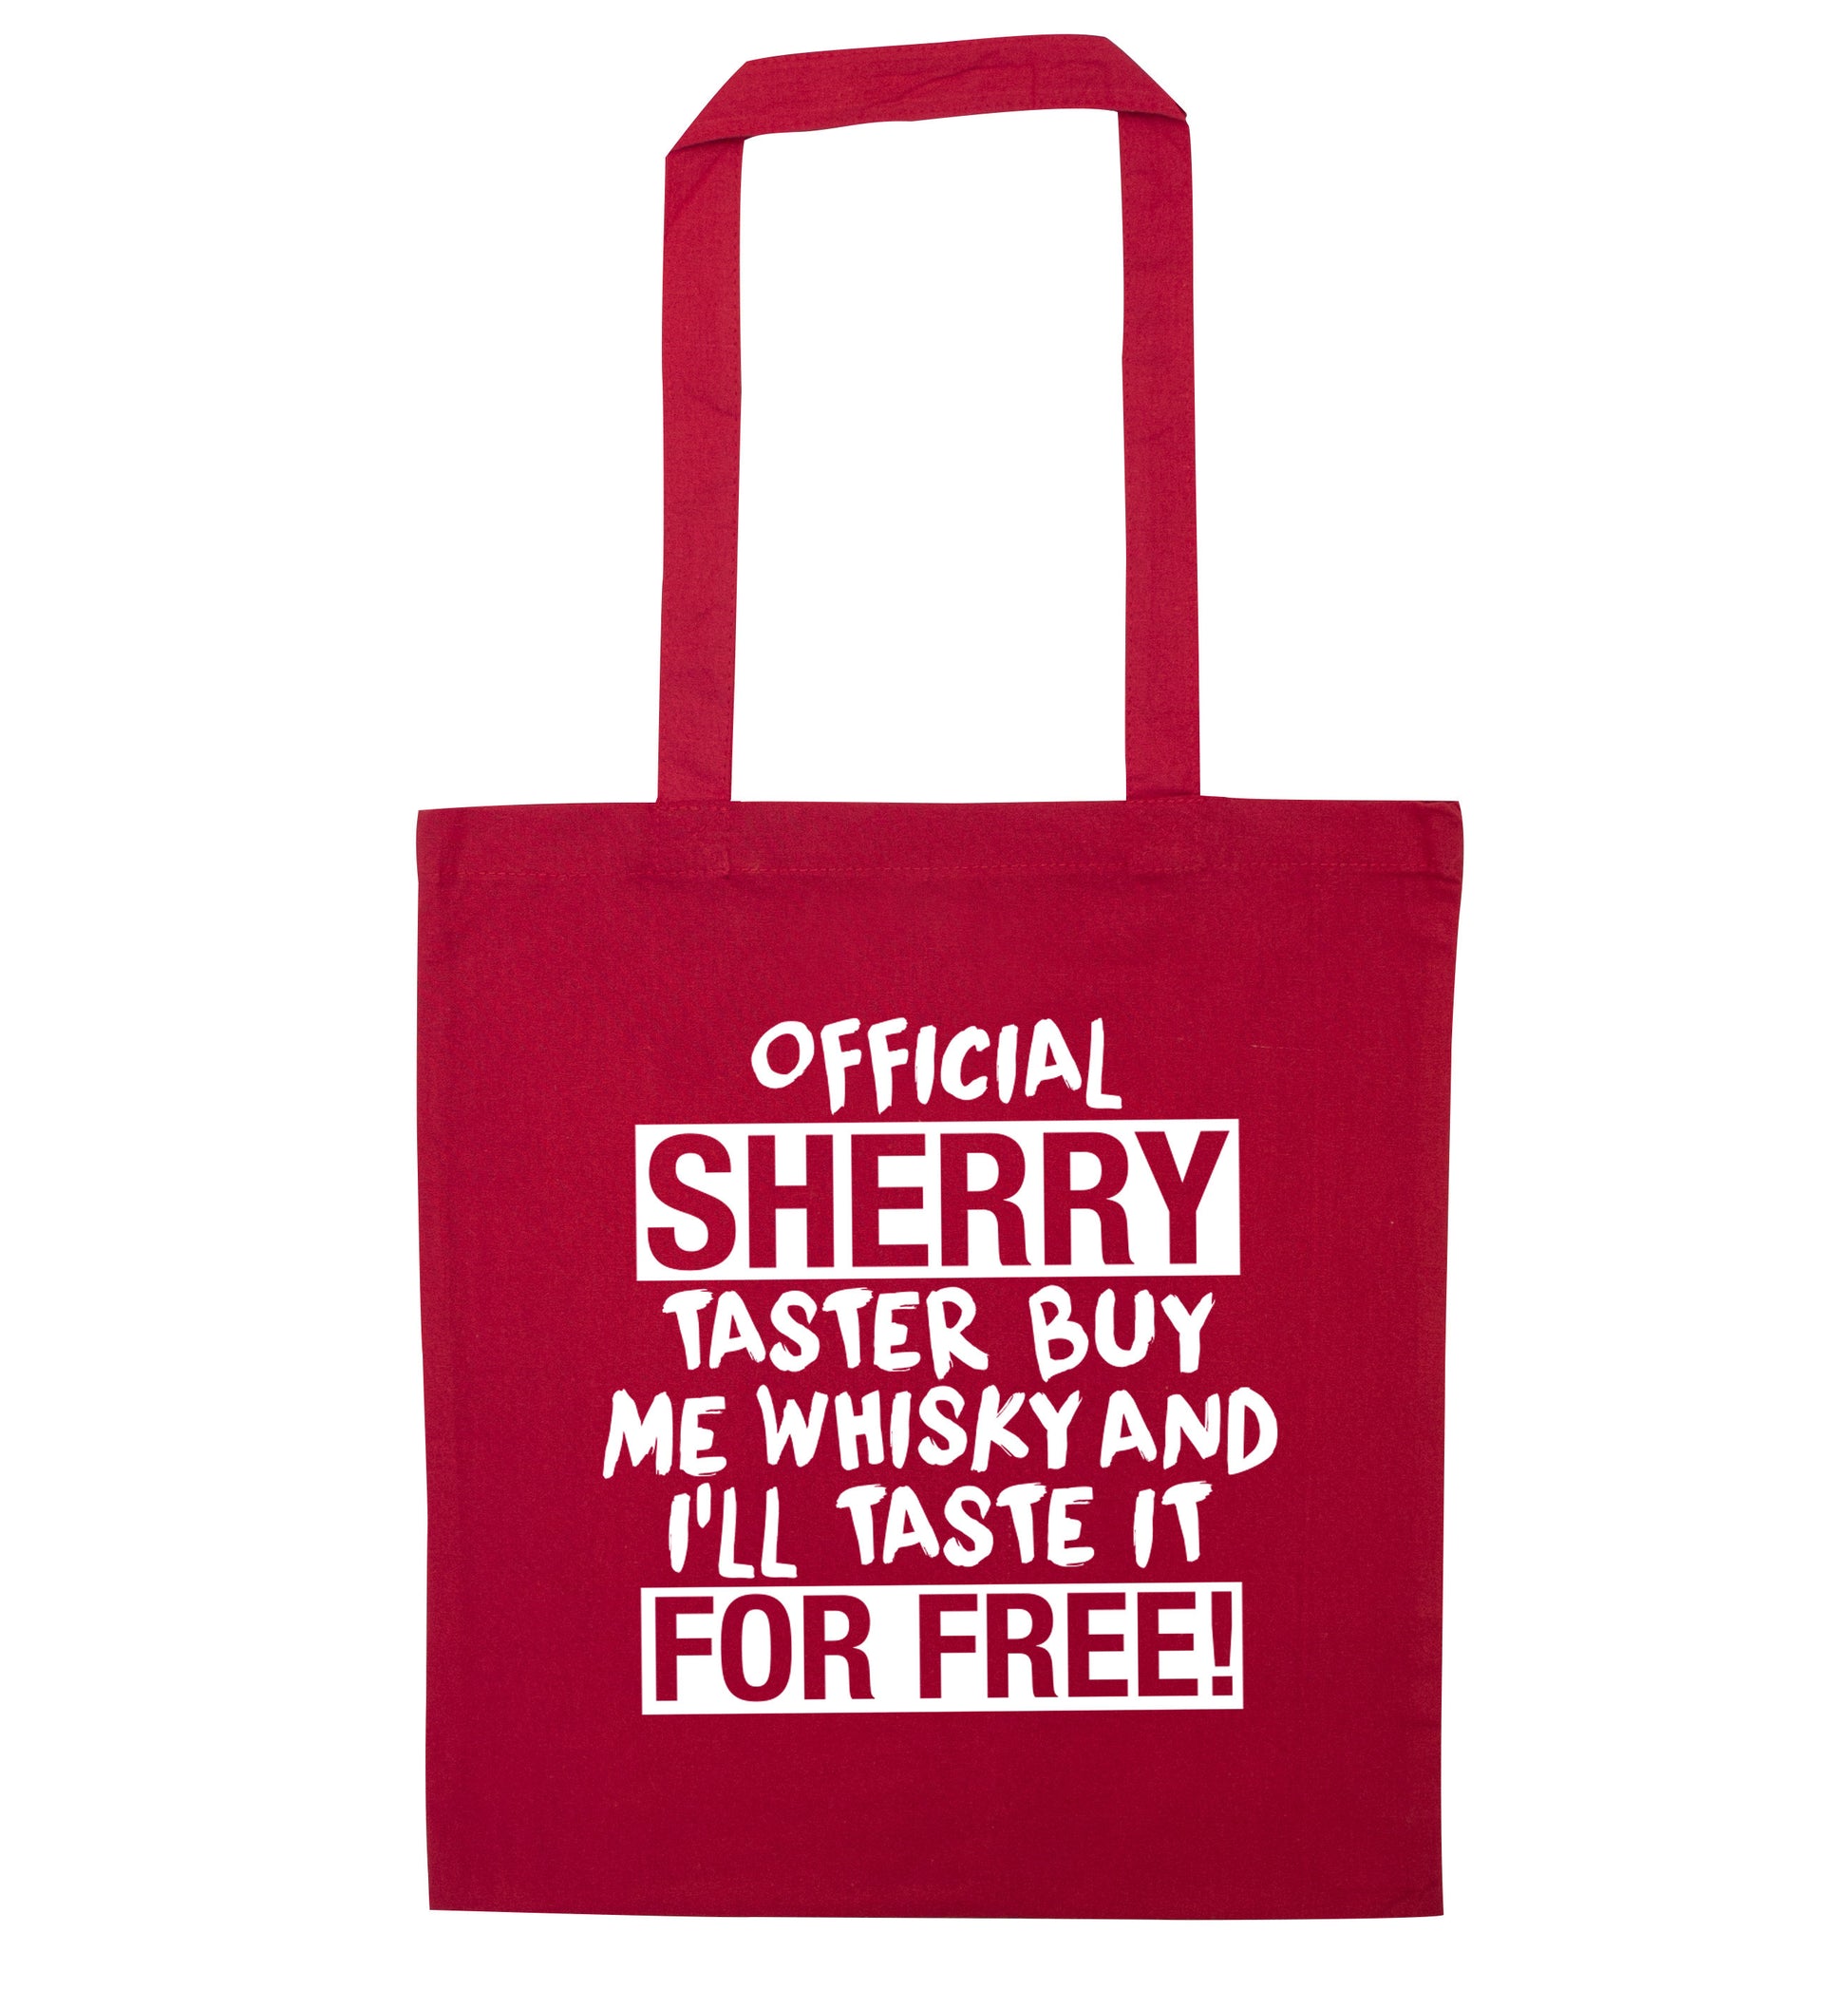 Official sherry taster buy me sherry and I'll taste it for free red tote bag